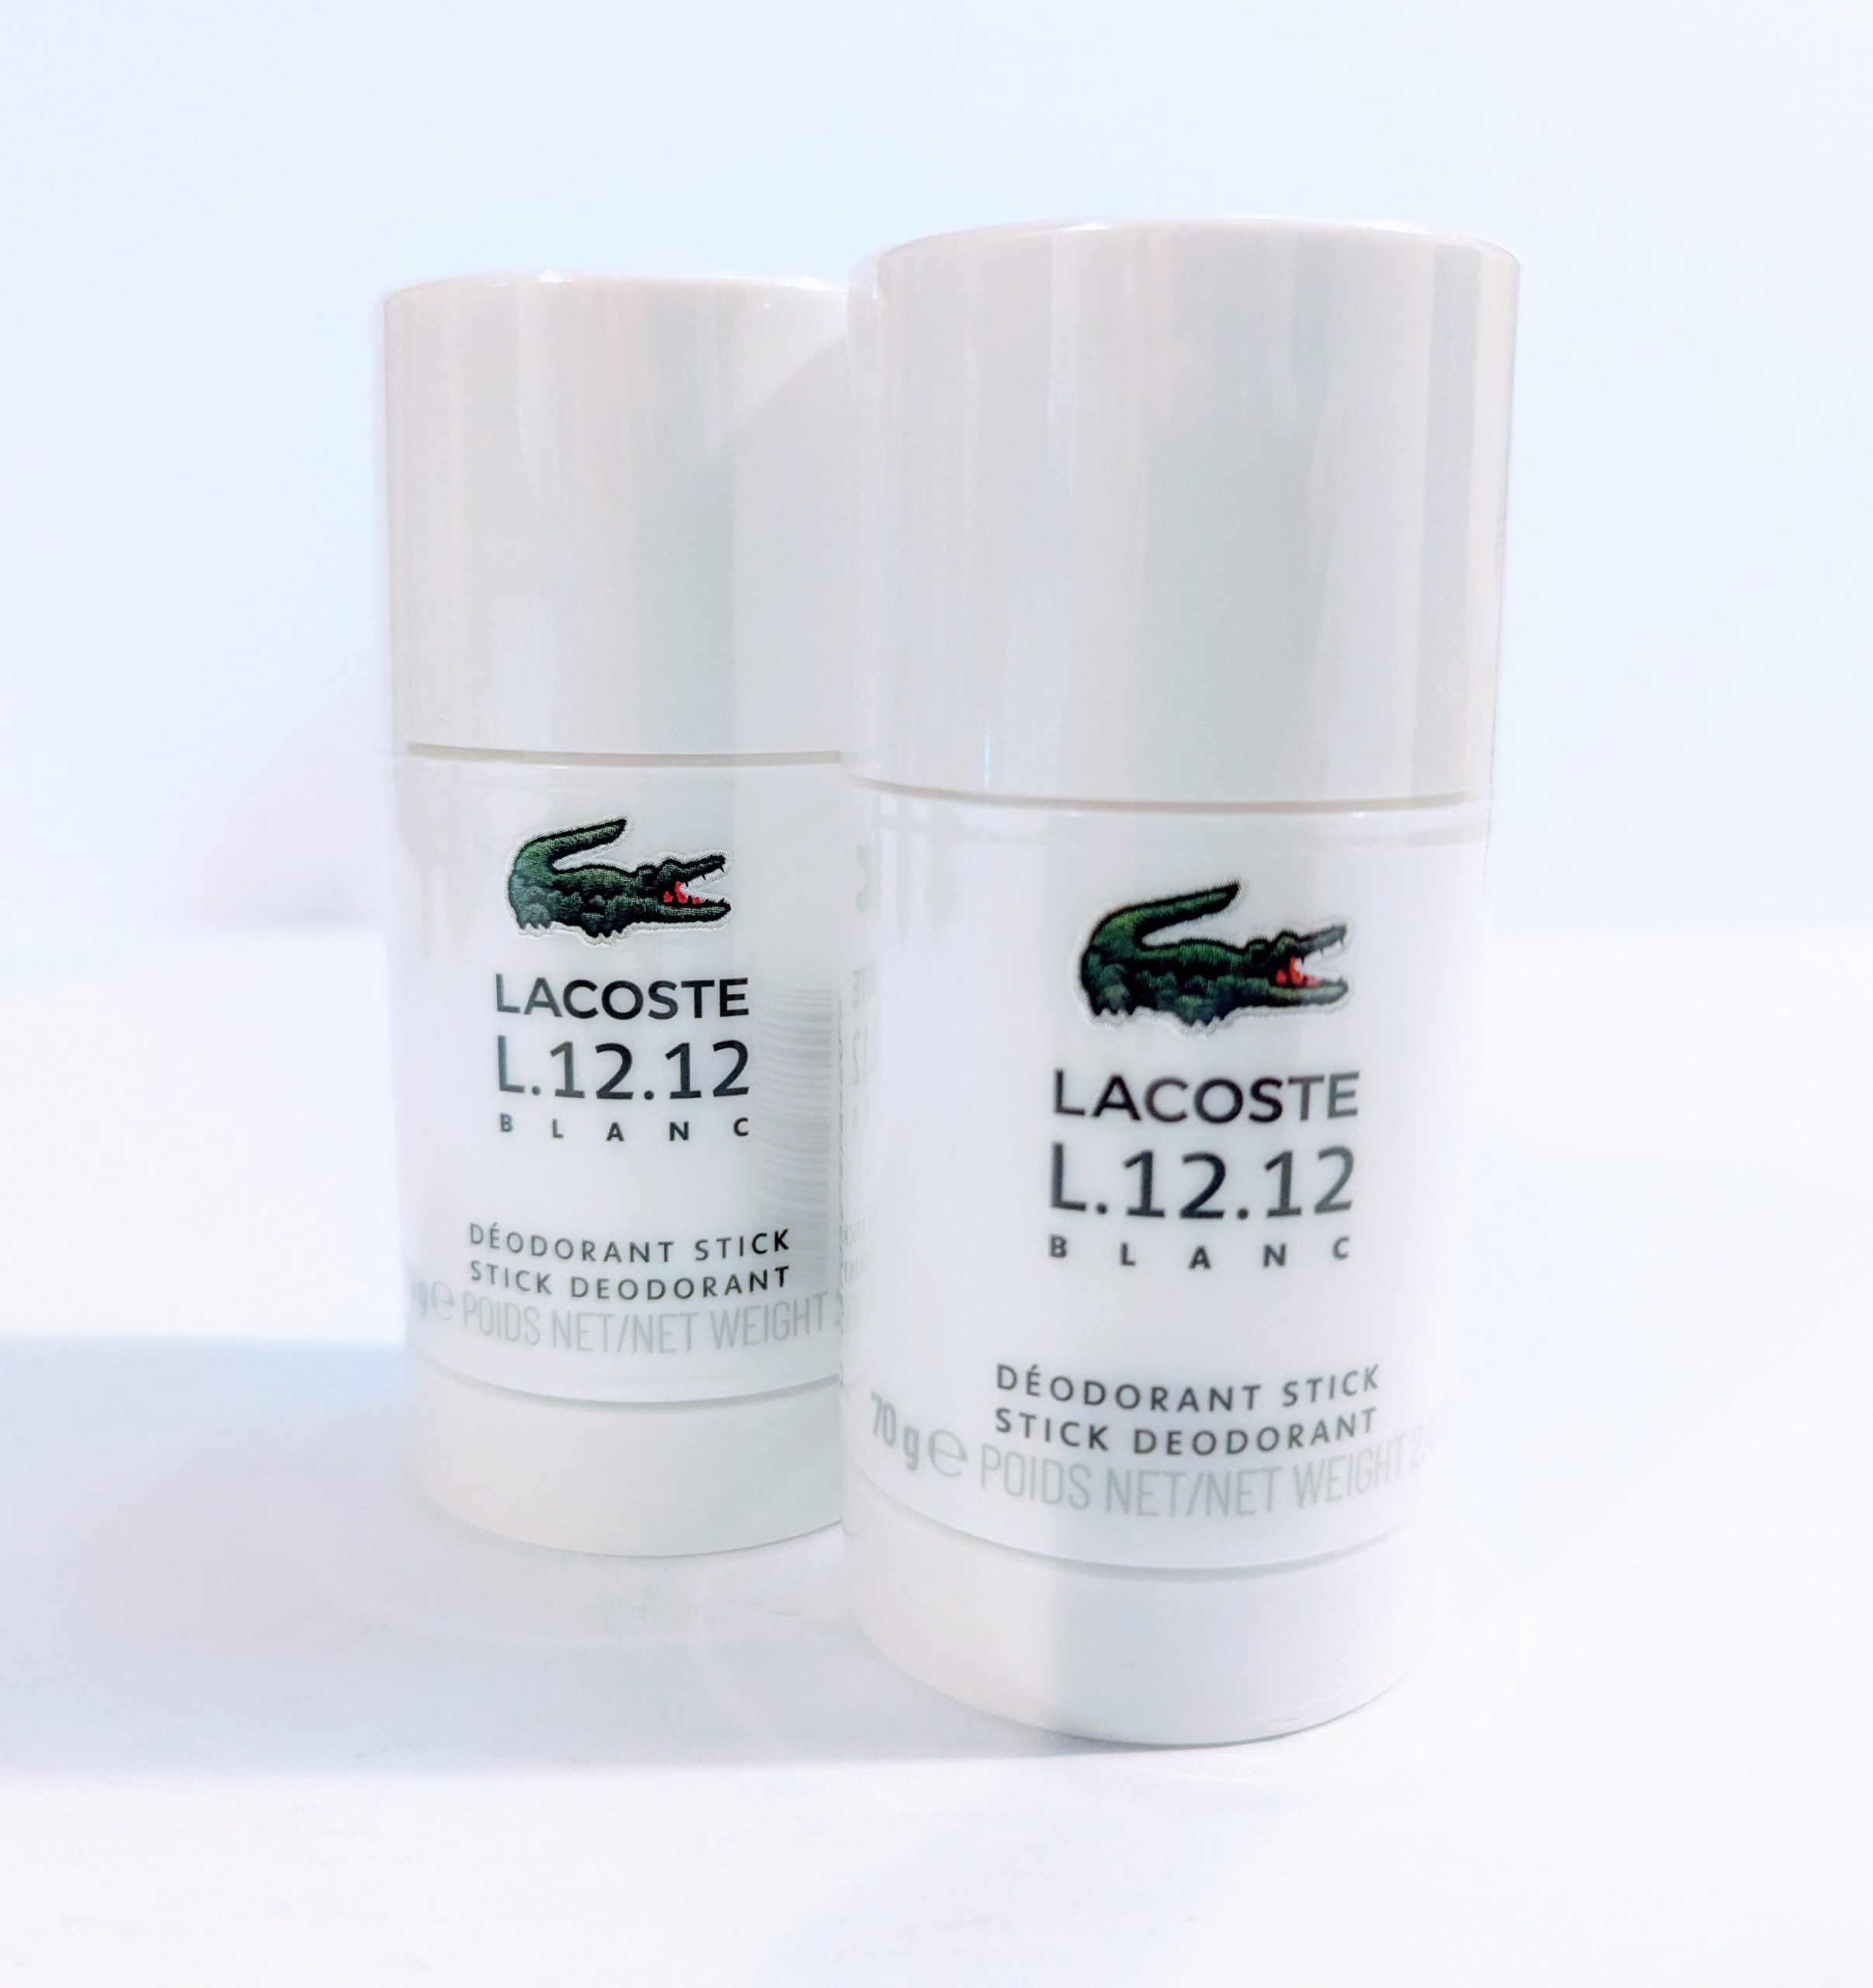 Two Lacoste L.12.12 Blanc Pure Deodorant Stick for Men on a white surface.